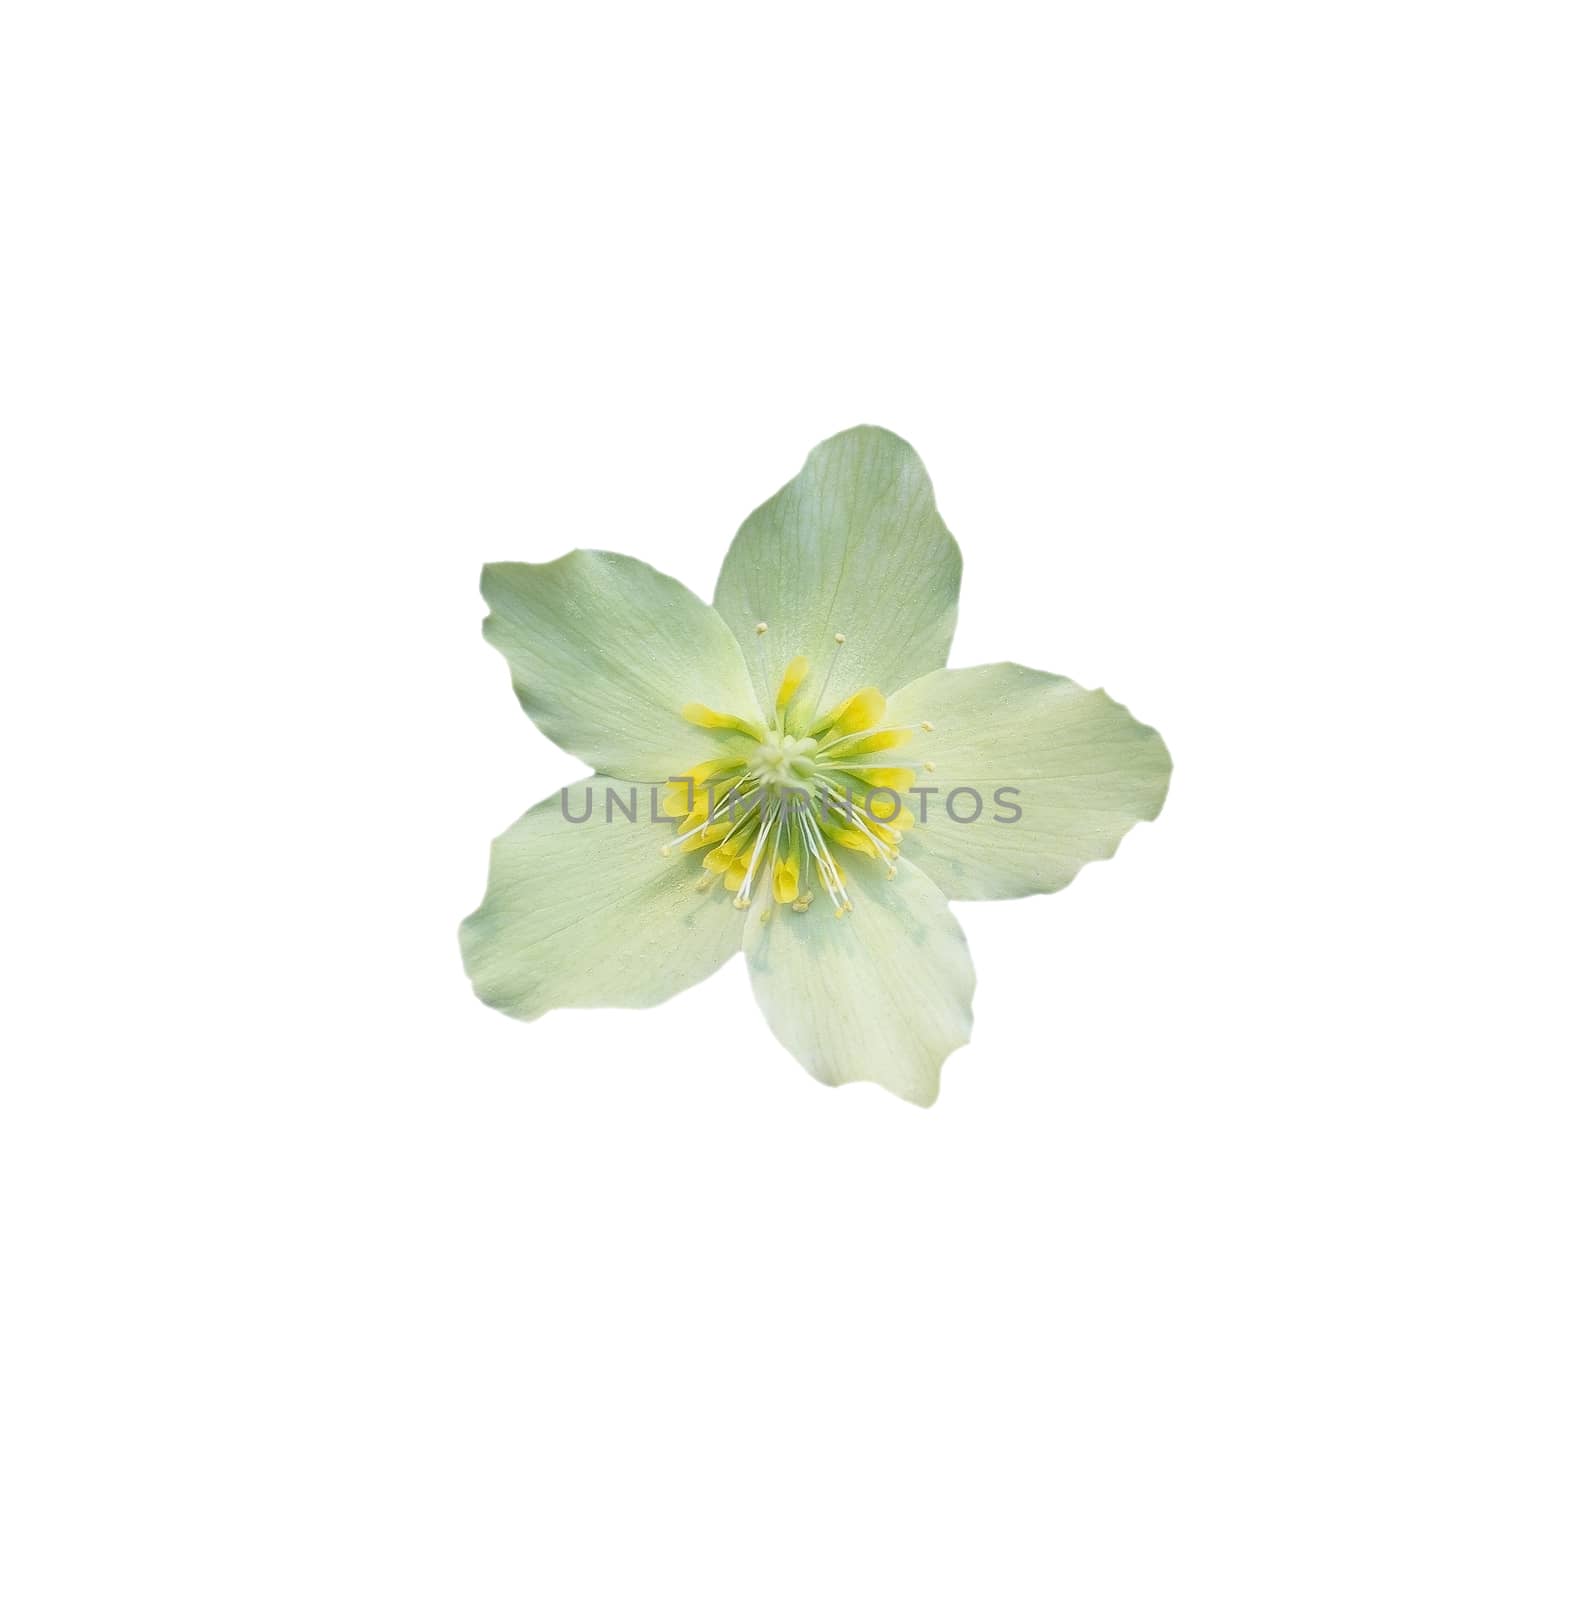 Helleborus Christmas white rose closeup with petals and pistils isolated on white